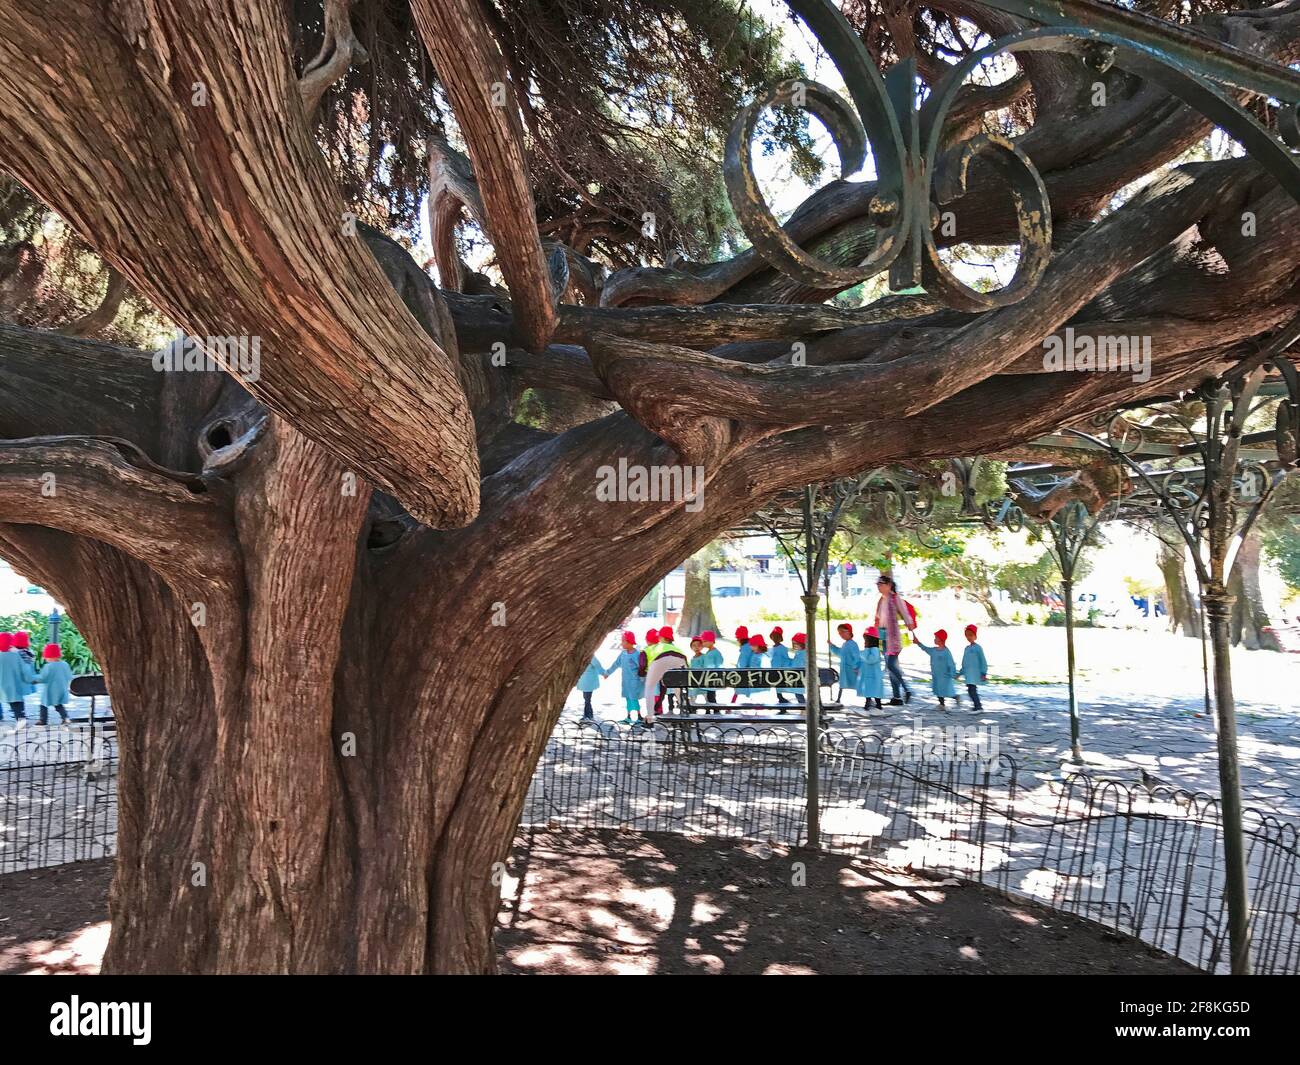 Lisbon, Portugal - March 10 2017 - Park ‘Jardim do Principe Real’ with a giant Prickly juniper tree  and preschool children Stock Photo